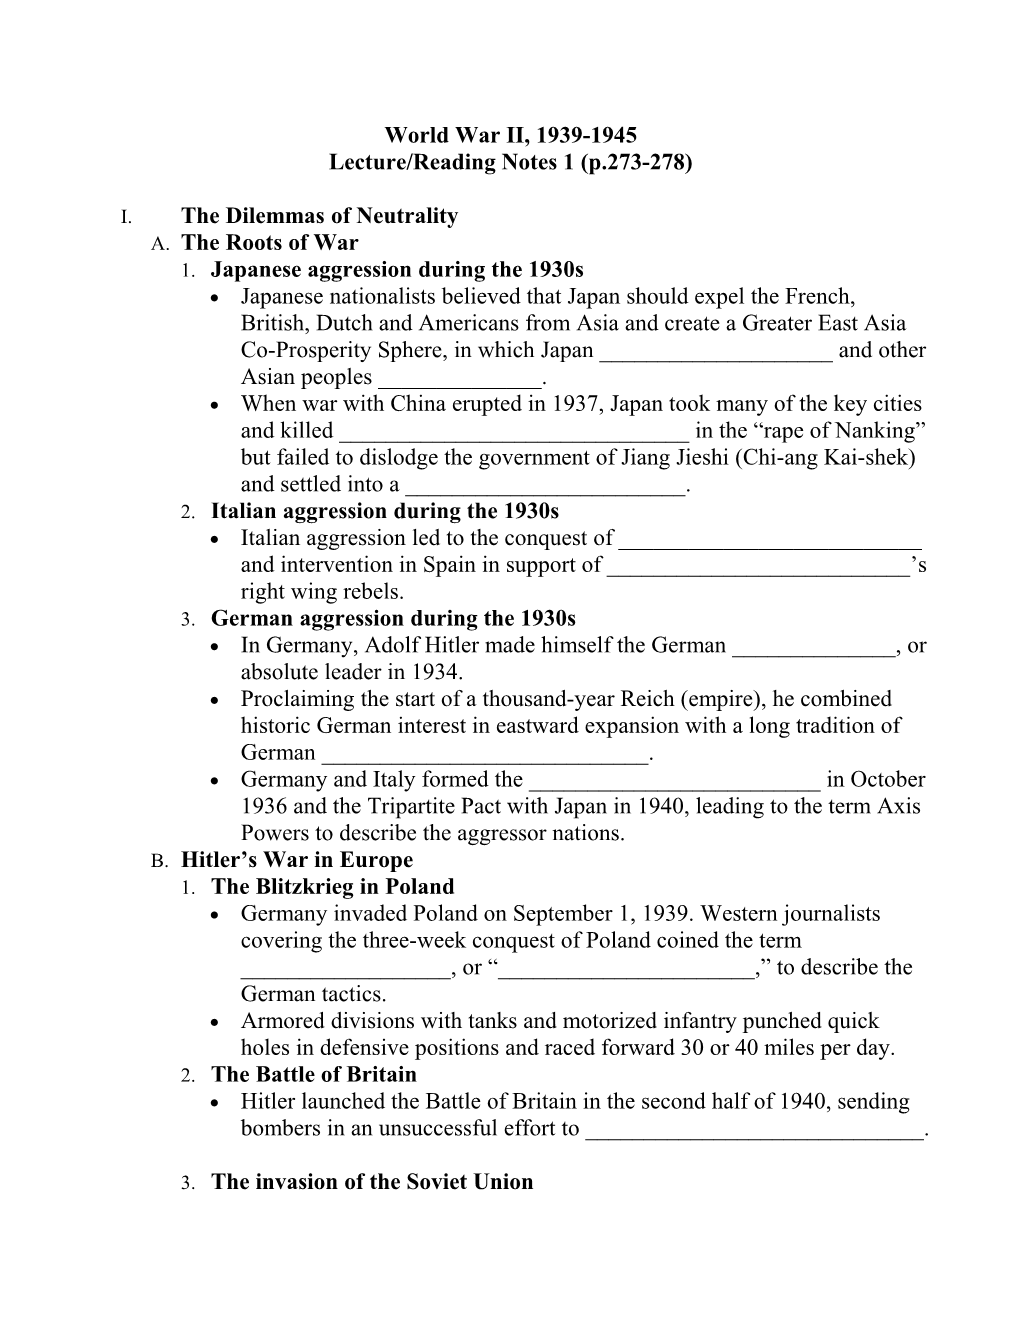 Lecture/Reading Notes 1 (P.273-278)